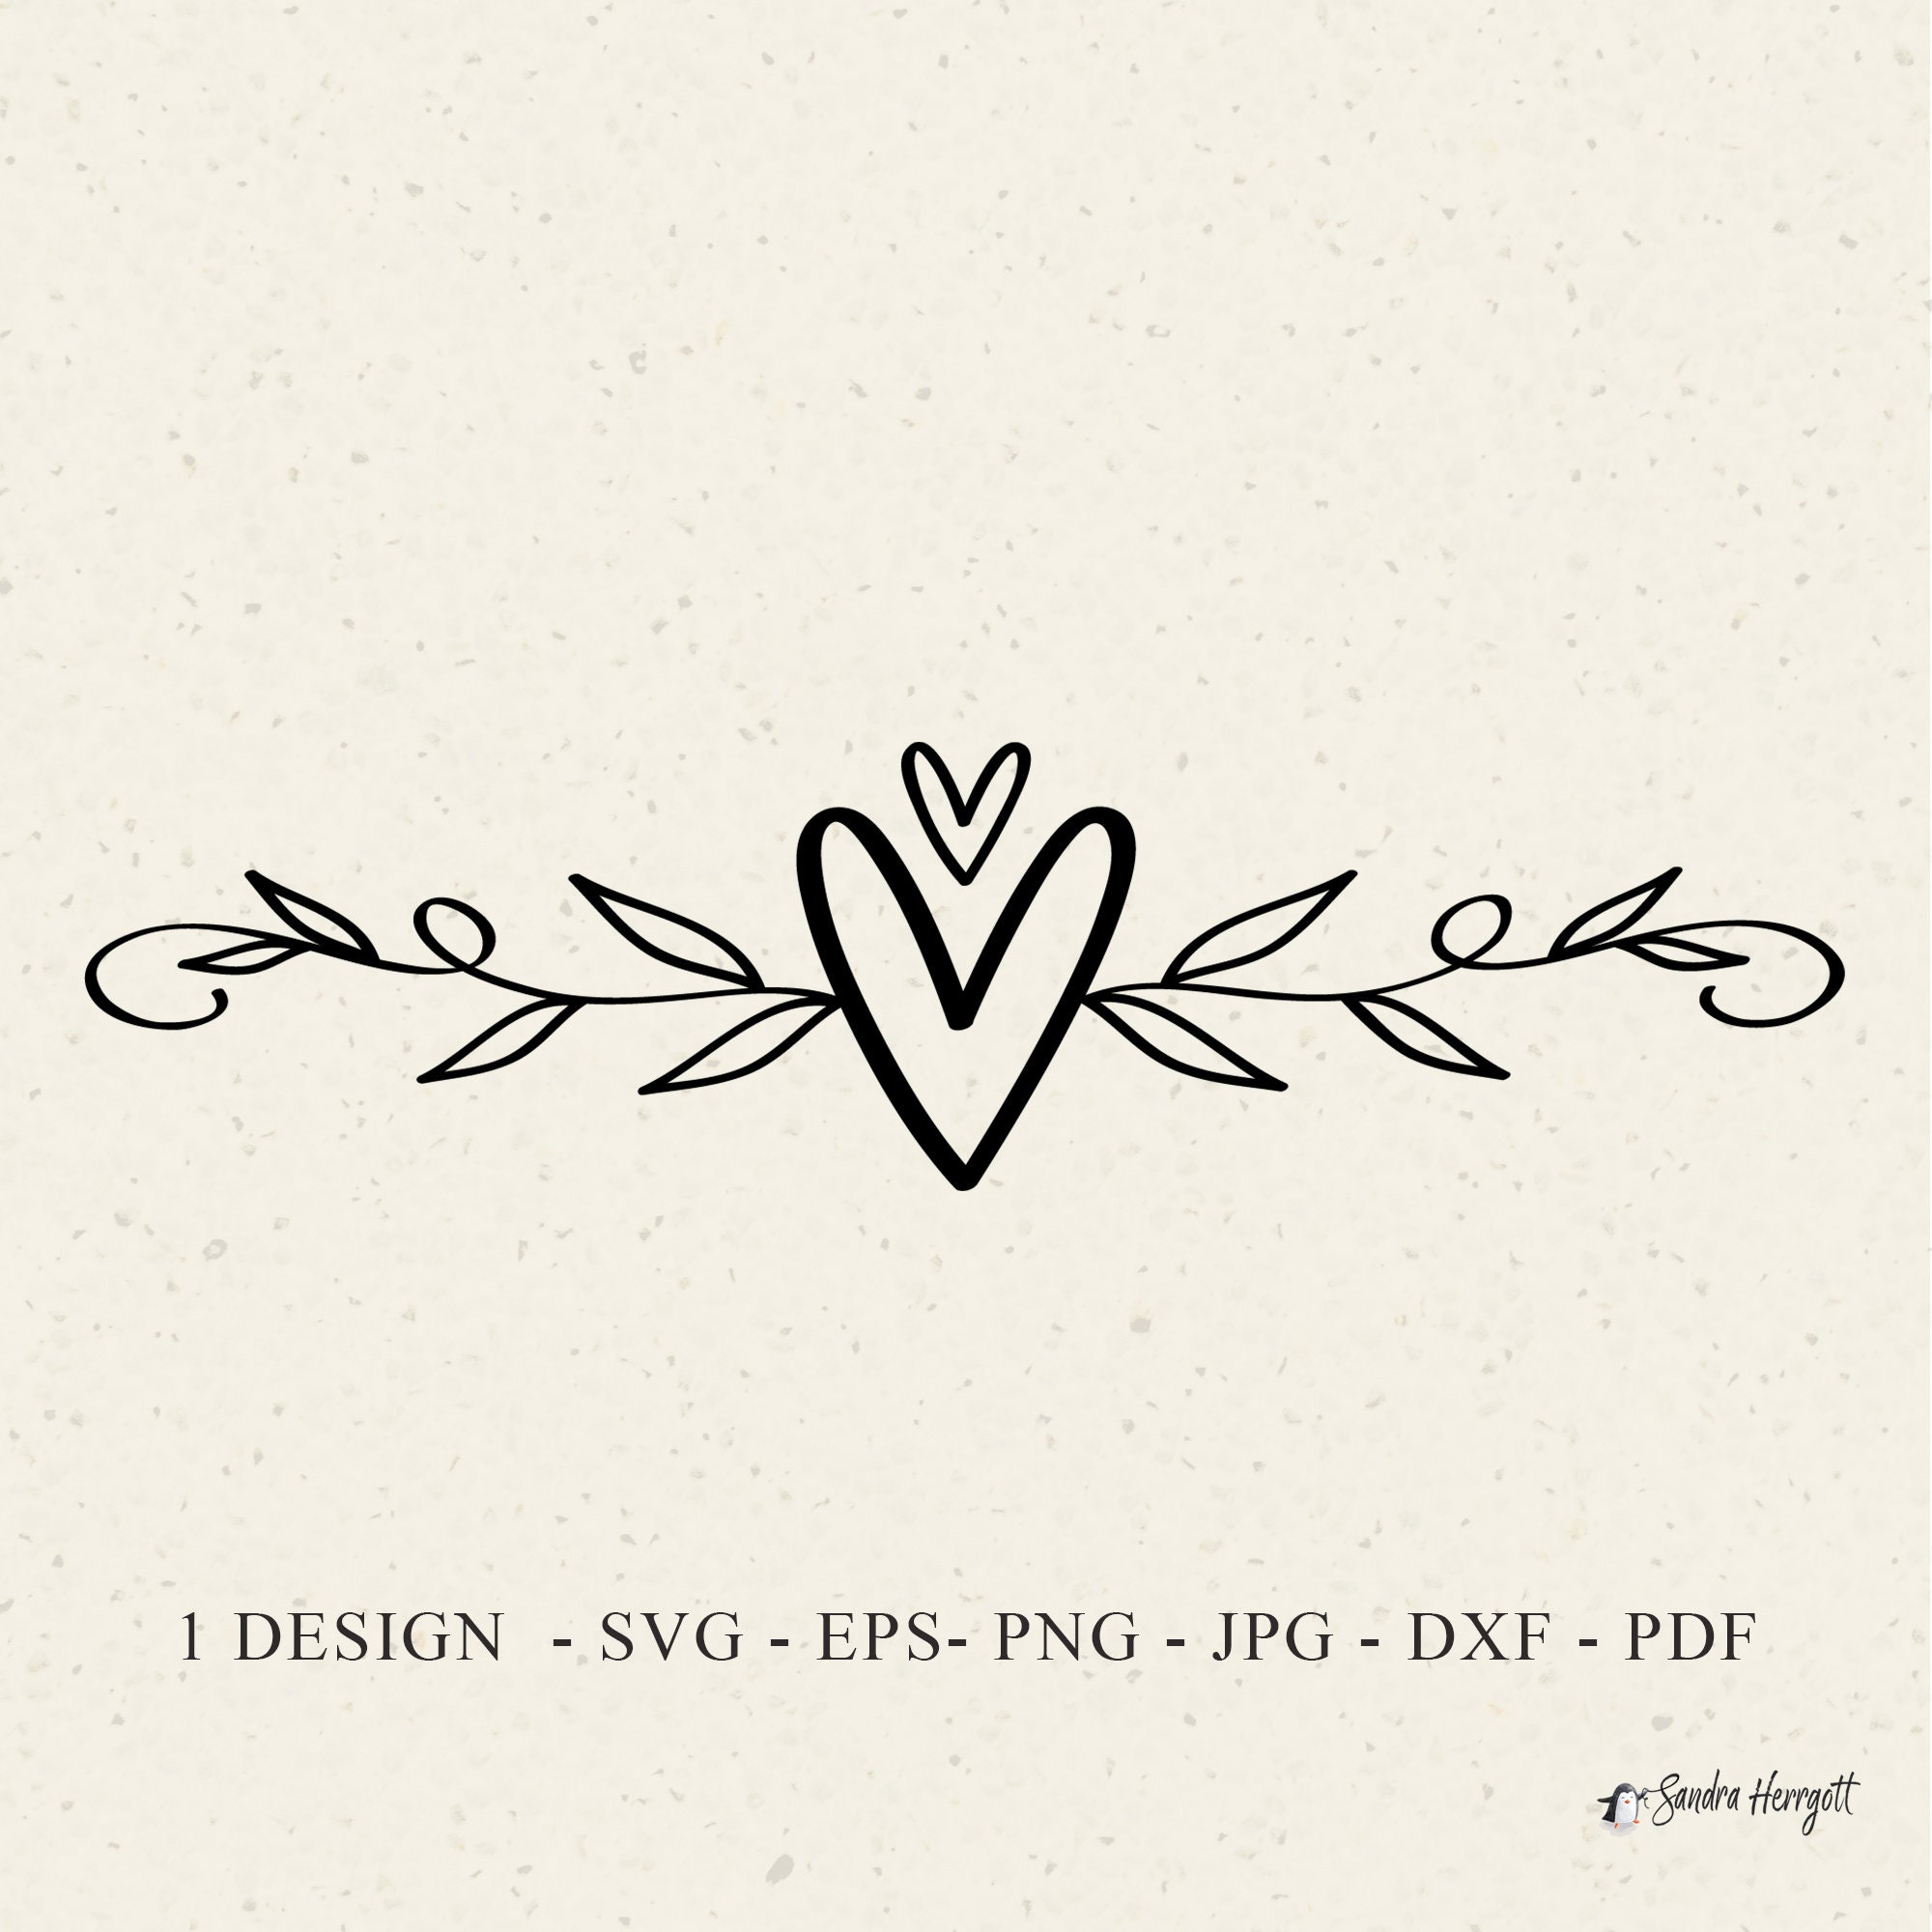 Double Heart Frame Rose Flourish Decoration – TotallyJamie: SVG Cut Files,  Graphic Sets & Clip arts